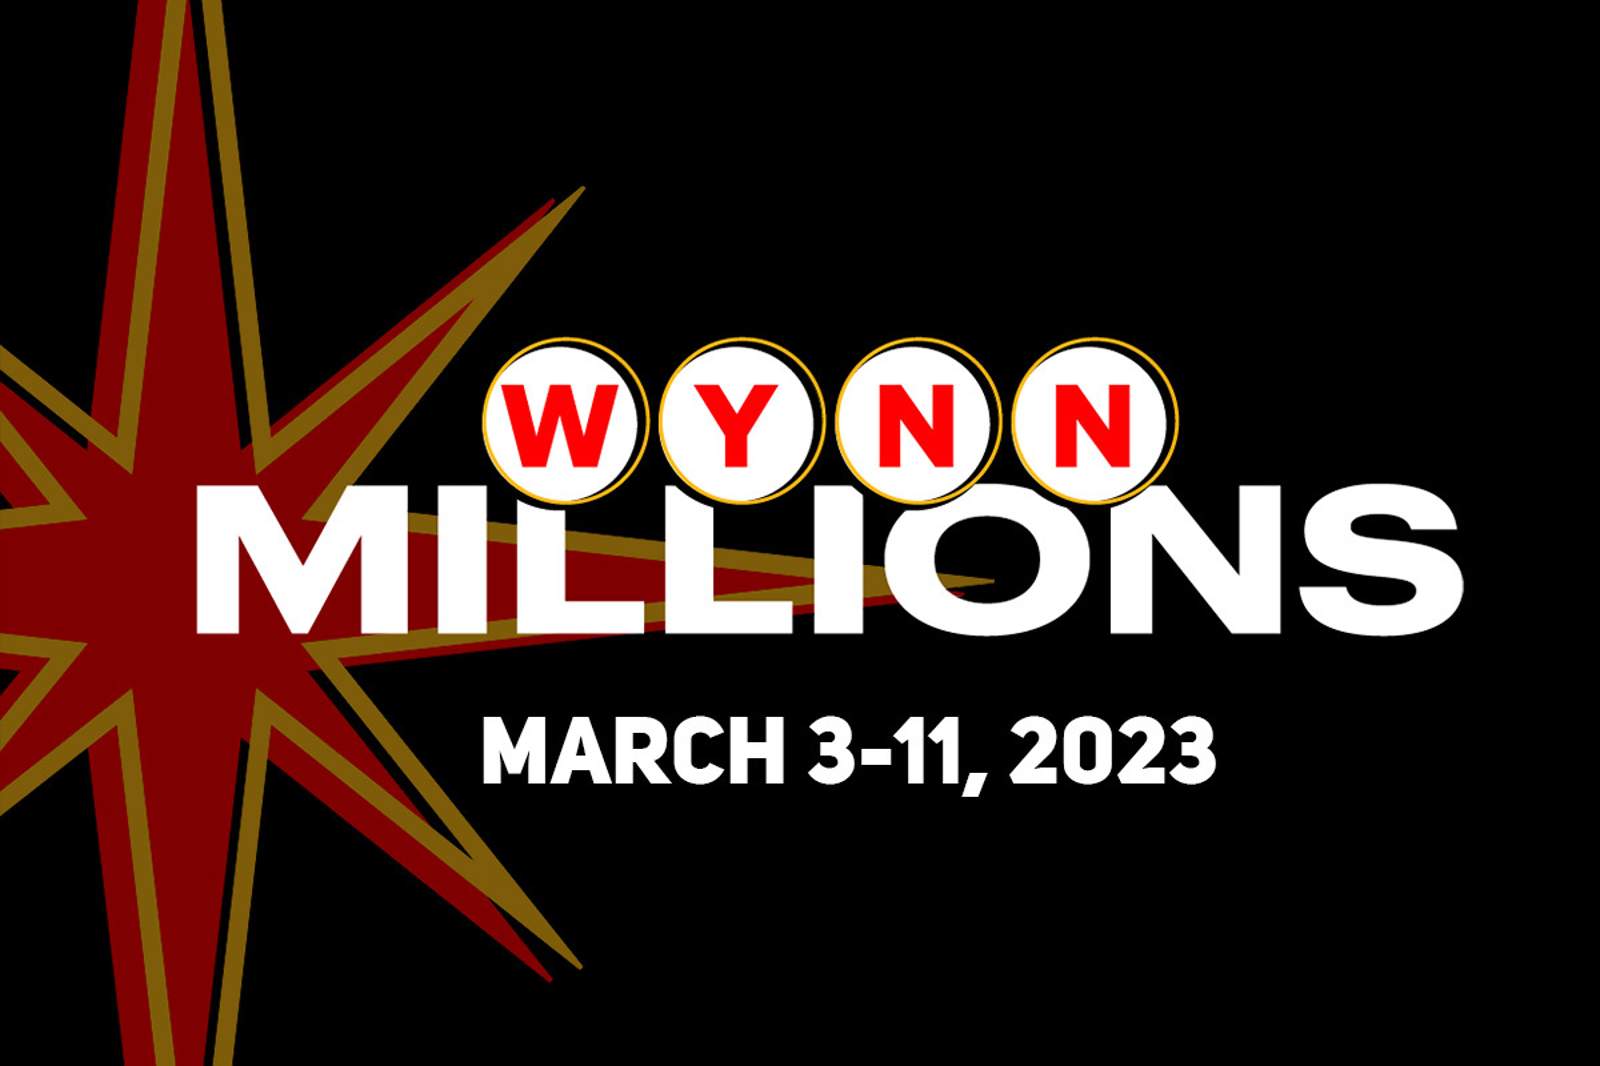 Wynn Millions Set to Host 3 PGT High Rollers on March 6-8